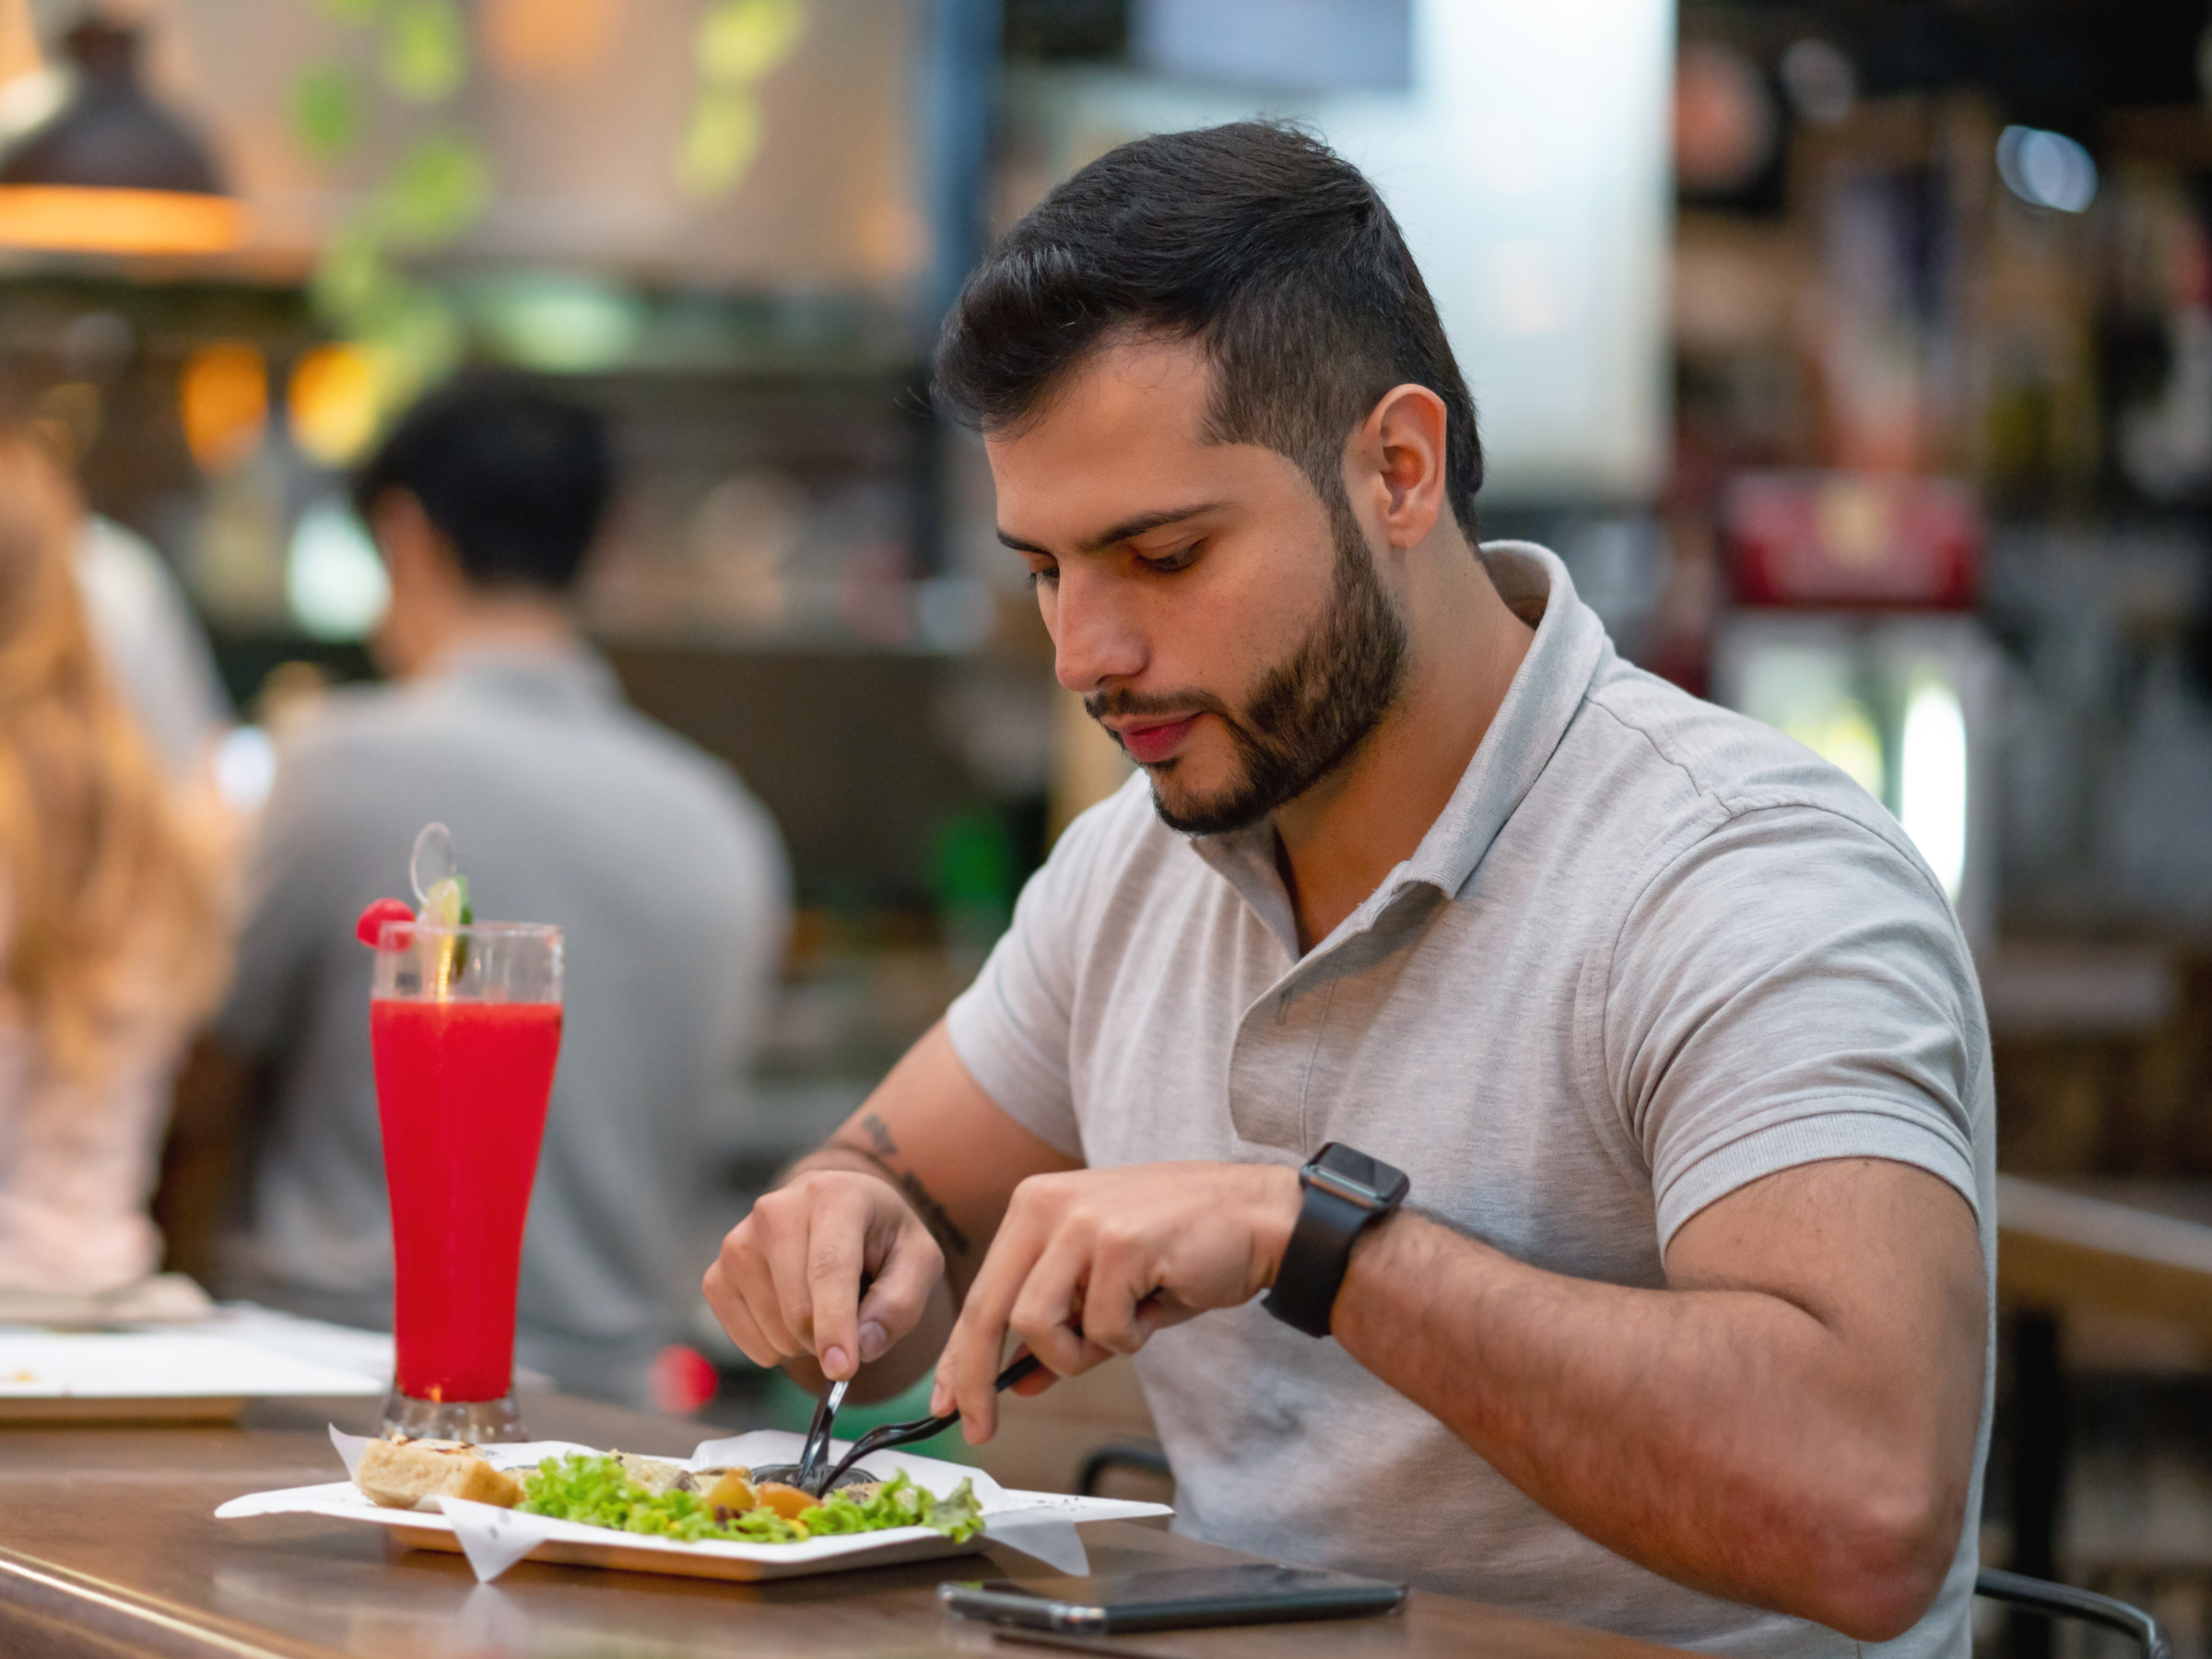 Man enjoying his meal alone in a restaurant